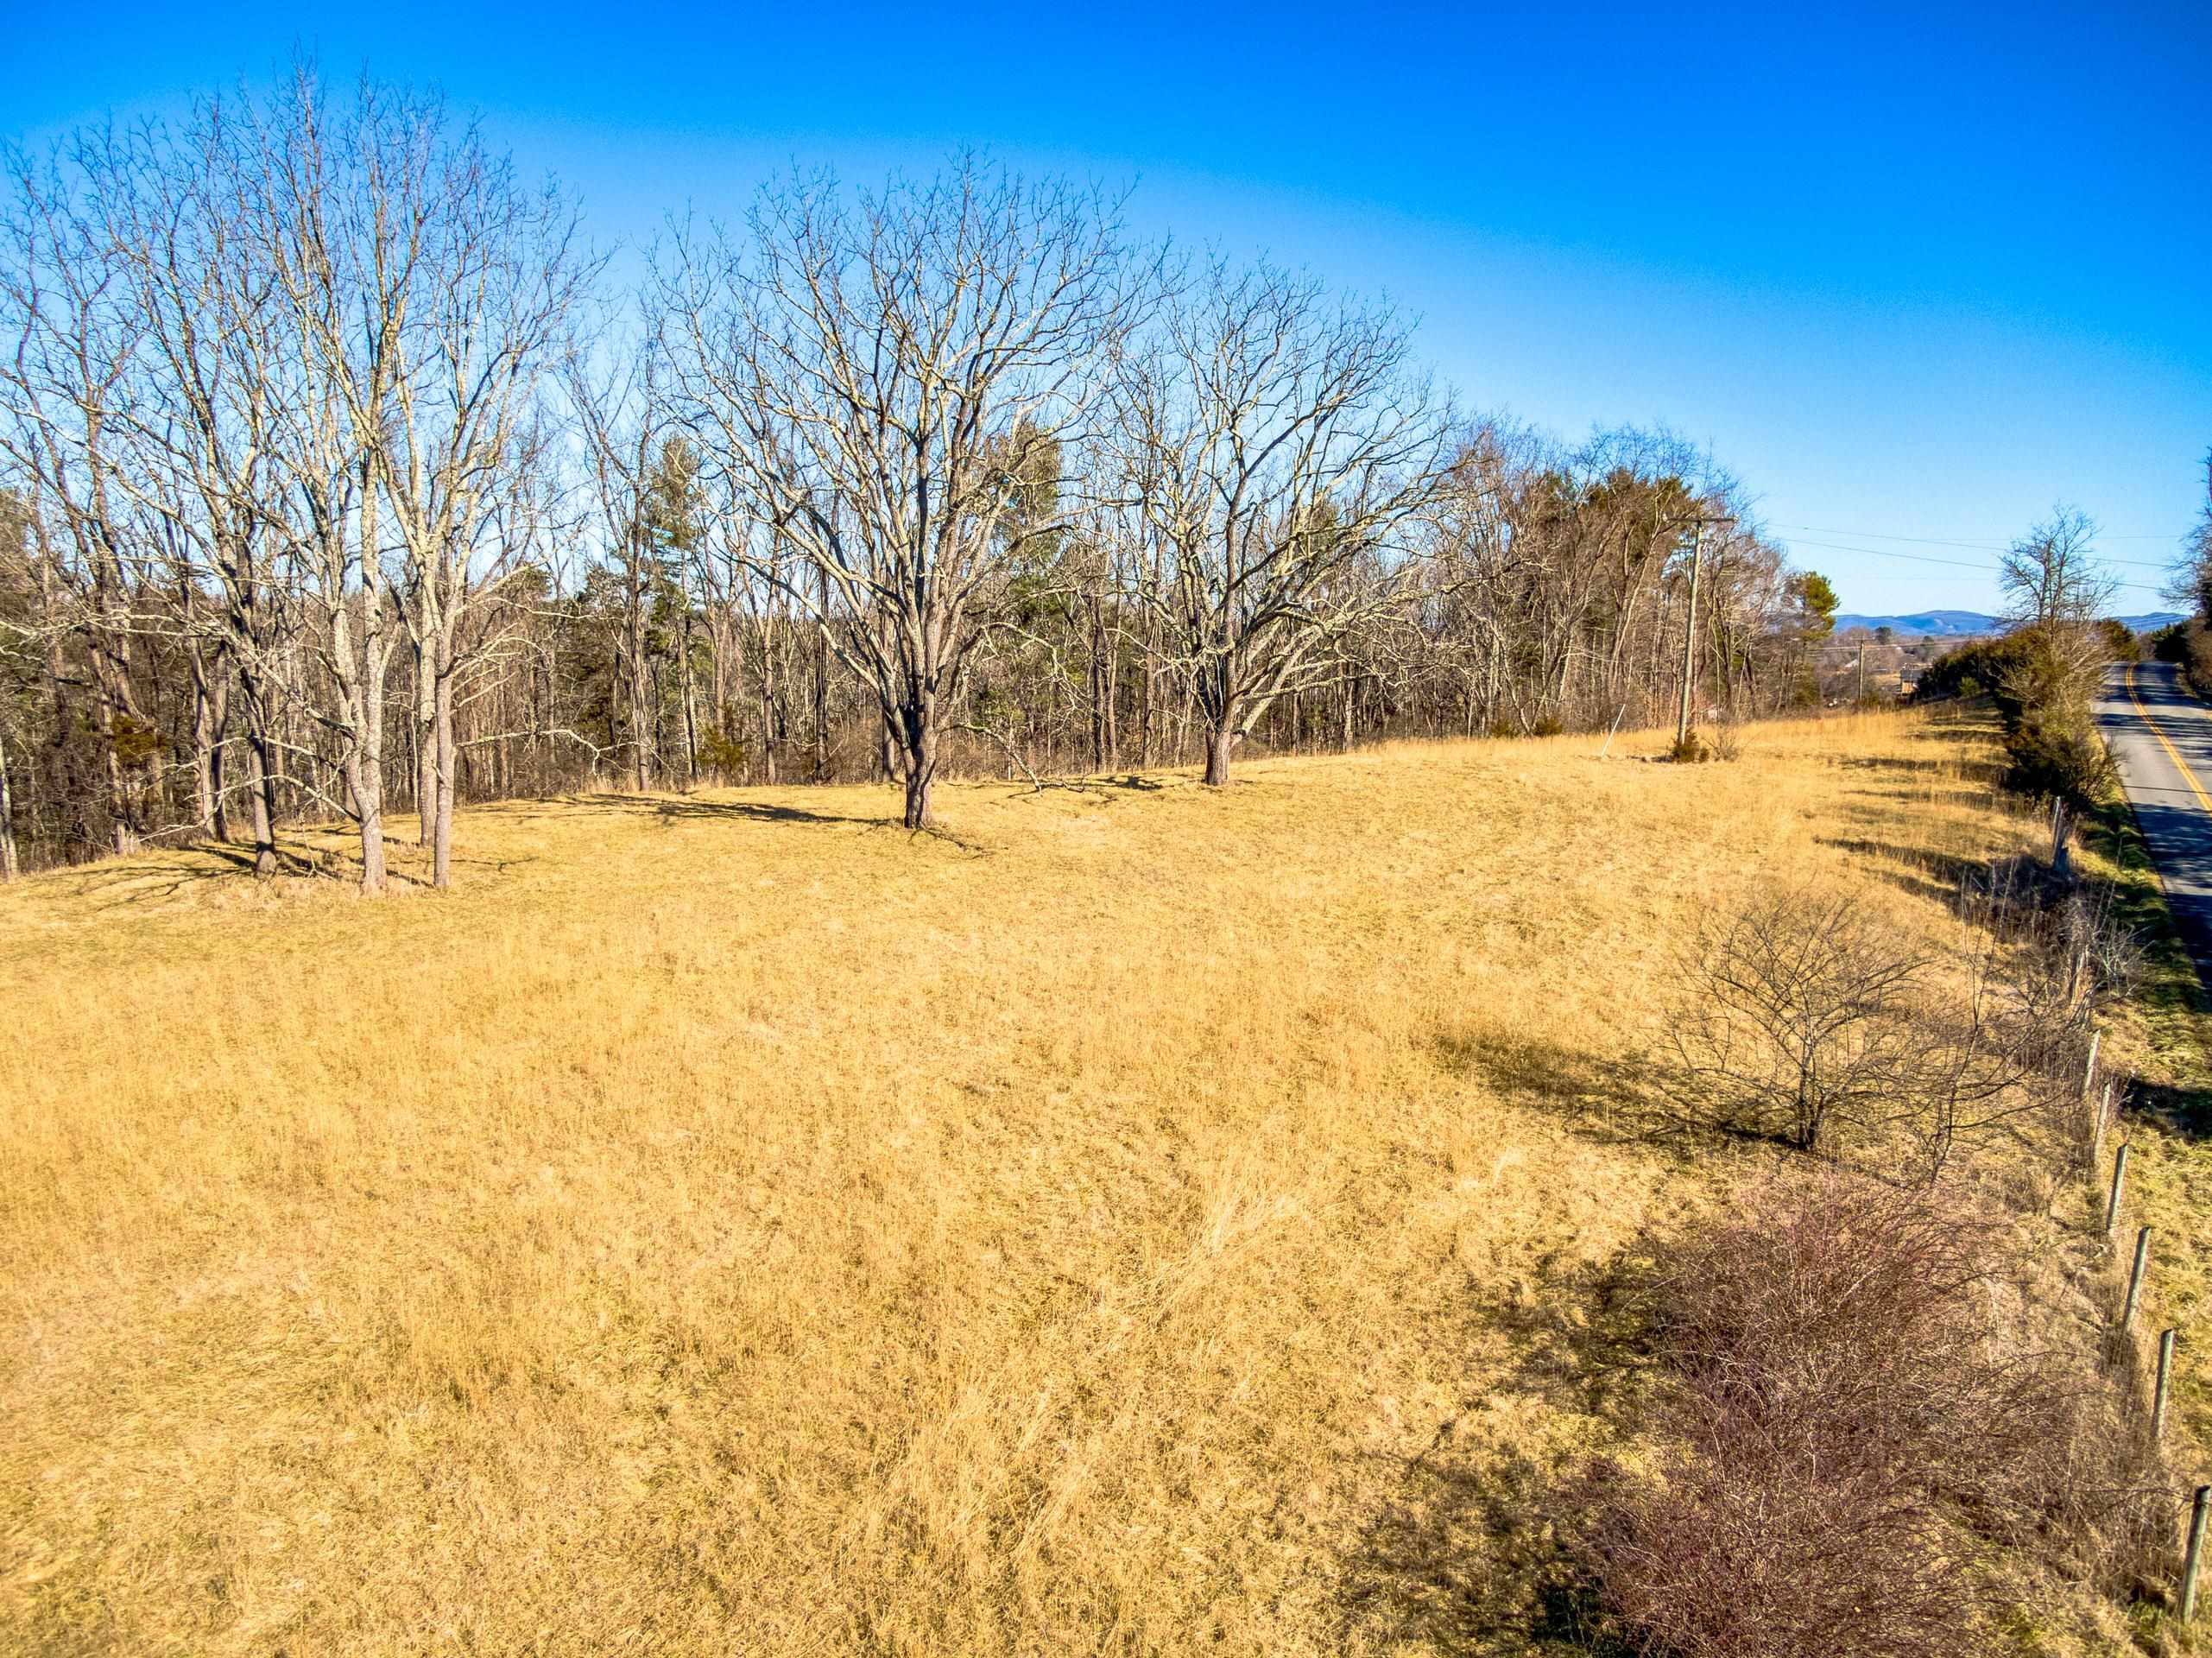 Very nice five-acre tract with open space and woods. Private location with convenience to RU, Carilion NRV, and I-81. Lots rarely come available in this desirable location. Schedule your tour today!